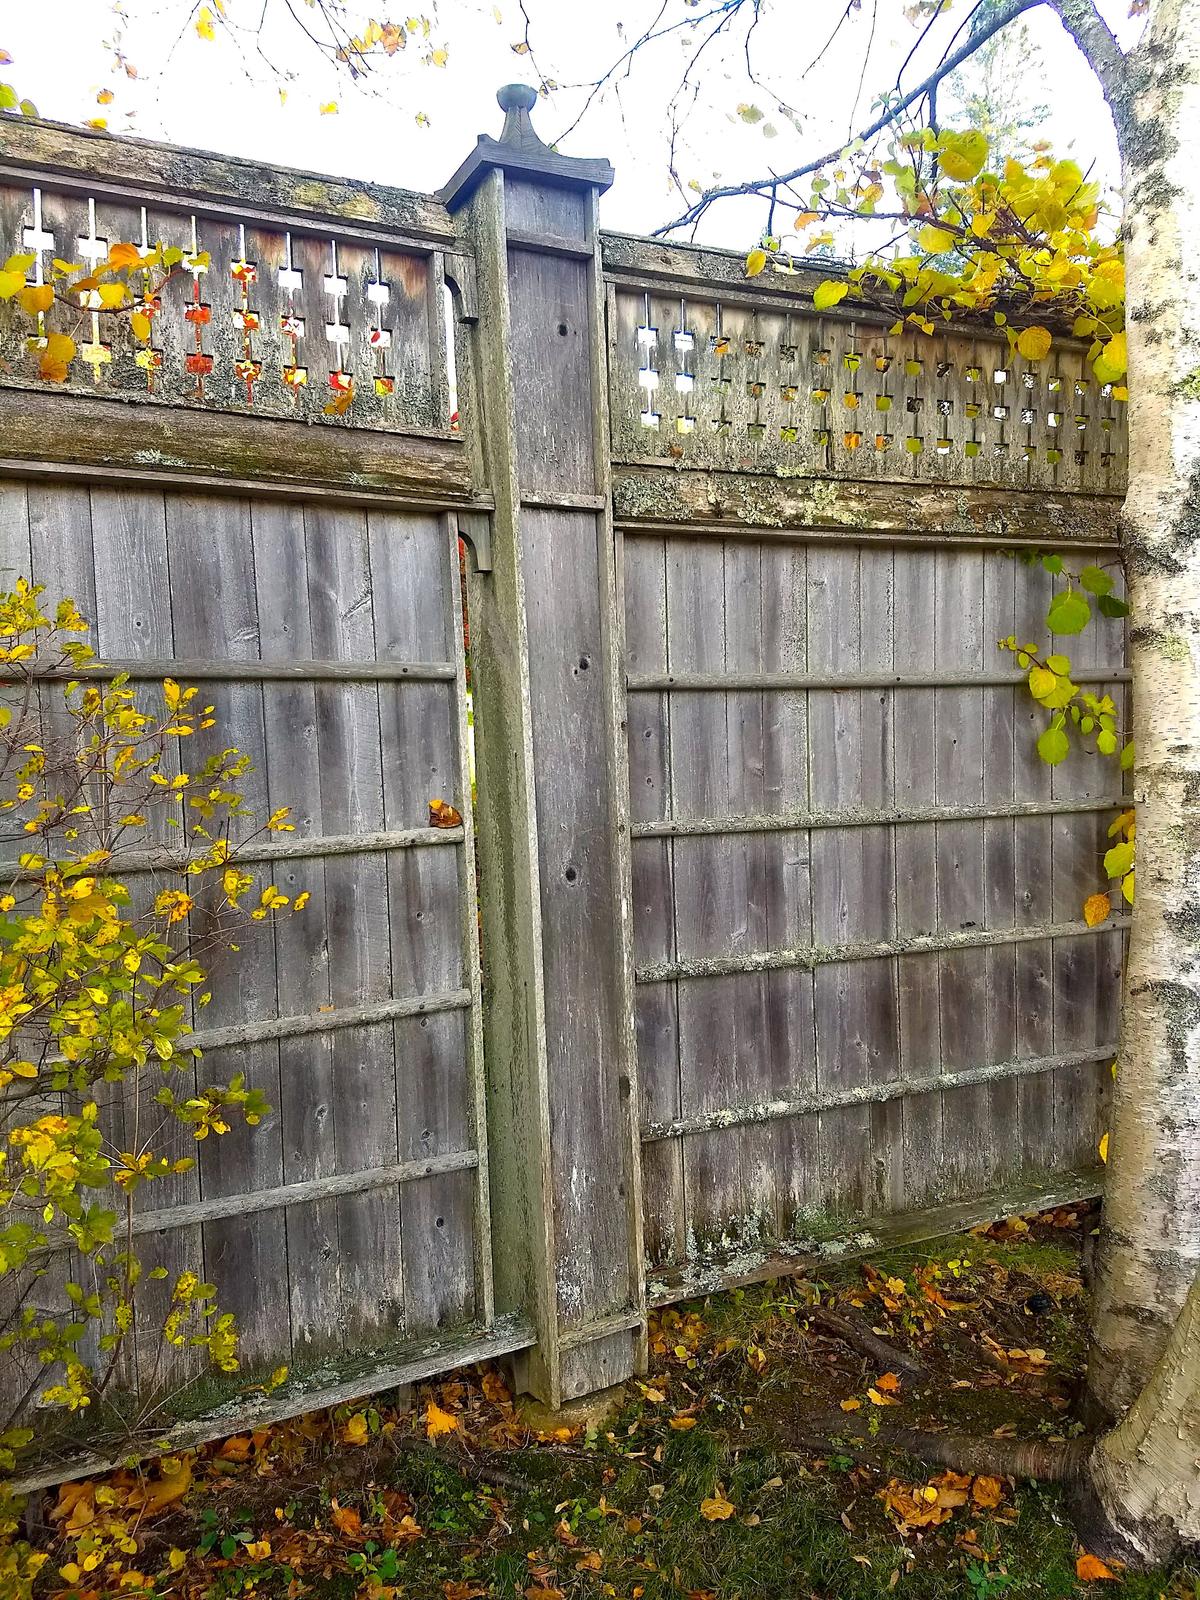 This weathered wood fencing looks hard to build, but you can do it with basic tools. (Tim Carter/TNS)